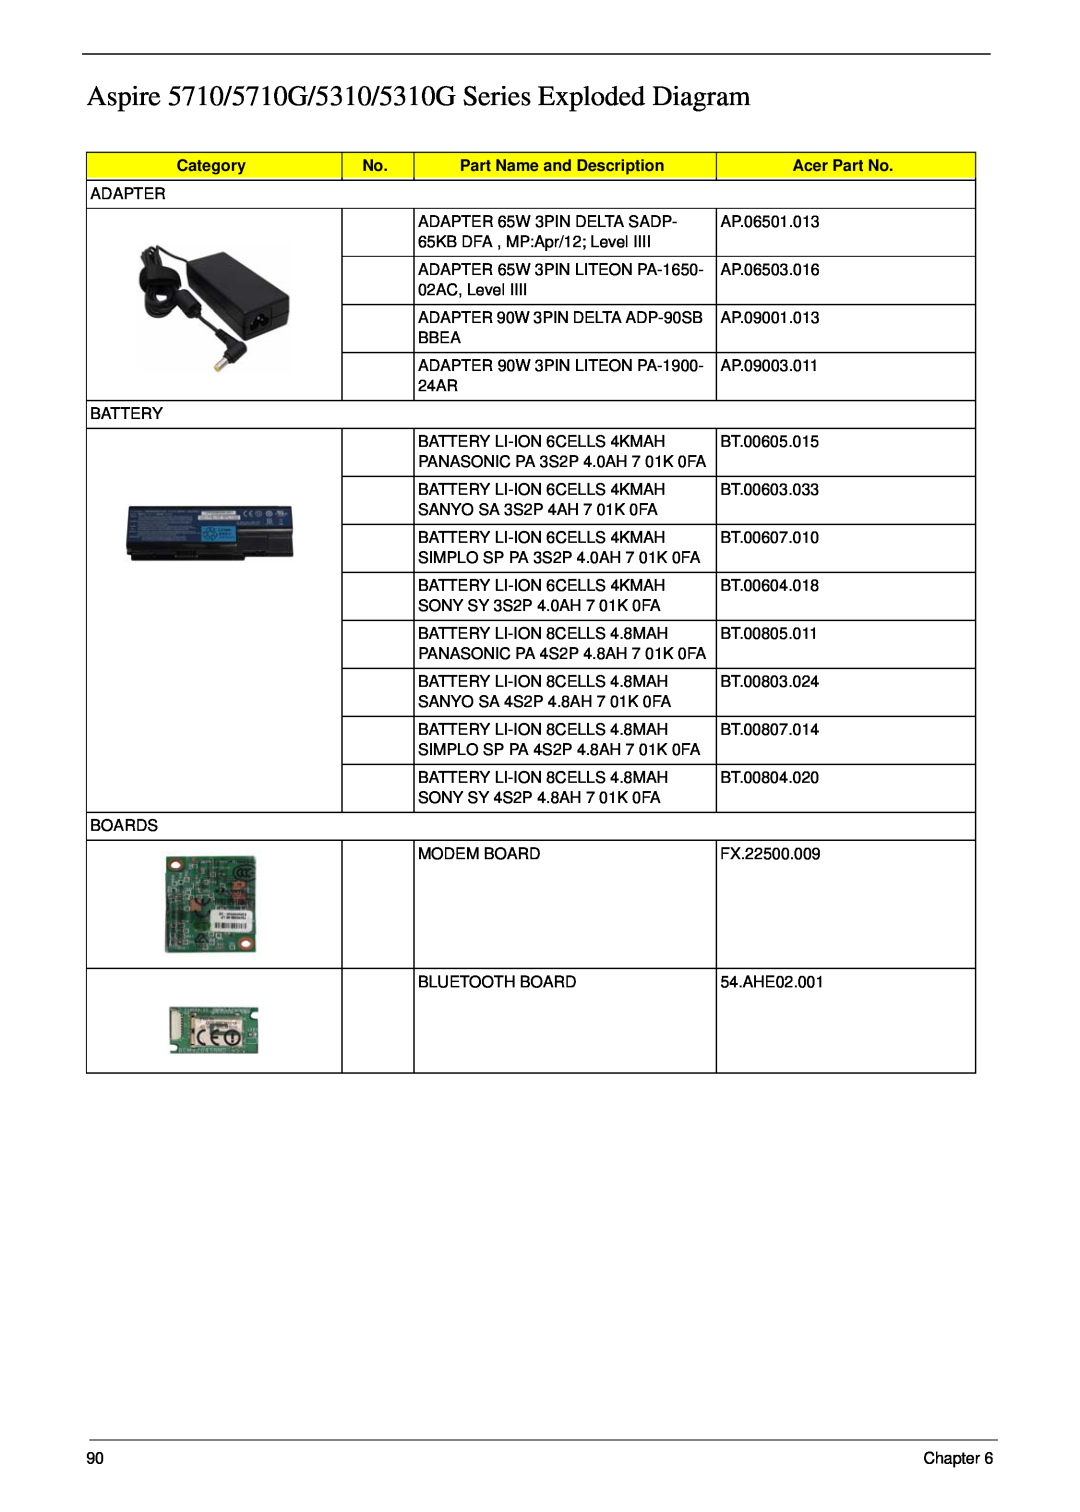 Acer manual Aspire 5710/5710G/5310/5310G Series Exploded Diagram, Category, Part Name and Description, Acer Part No 